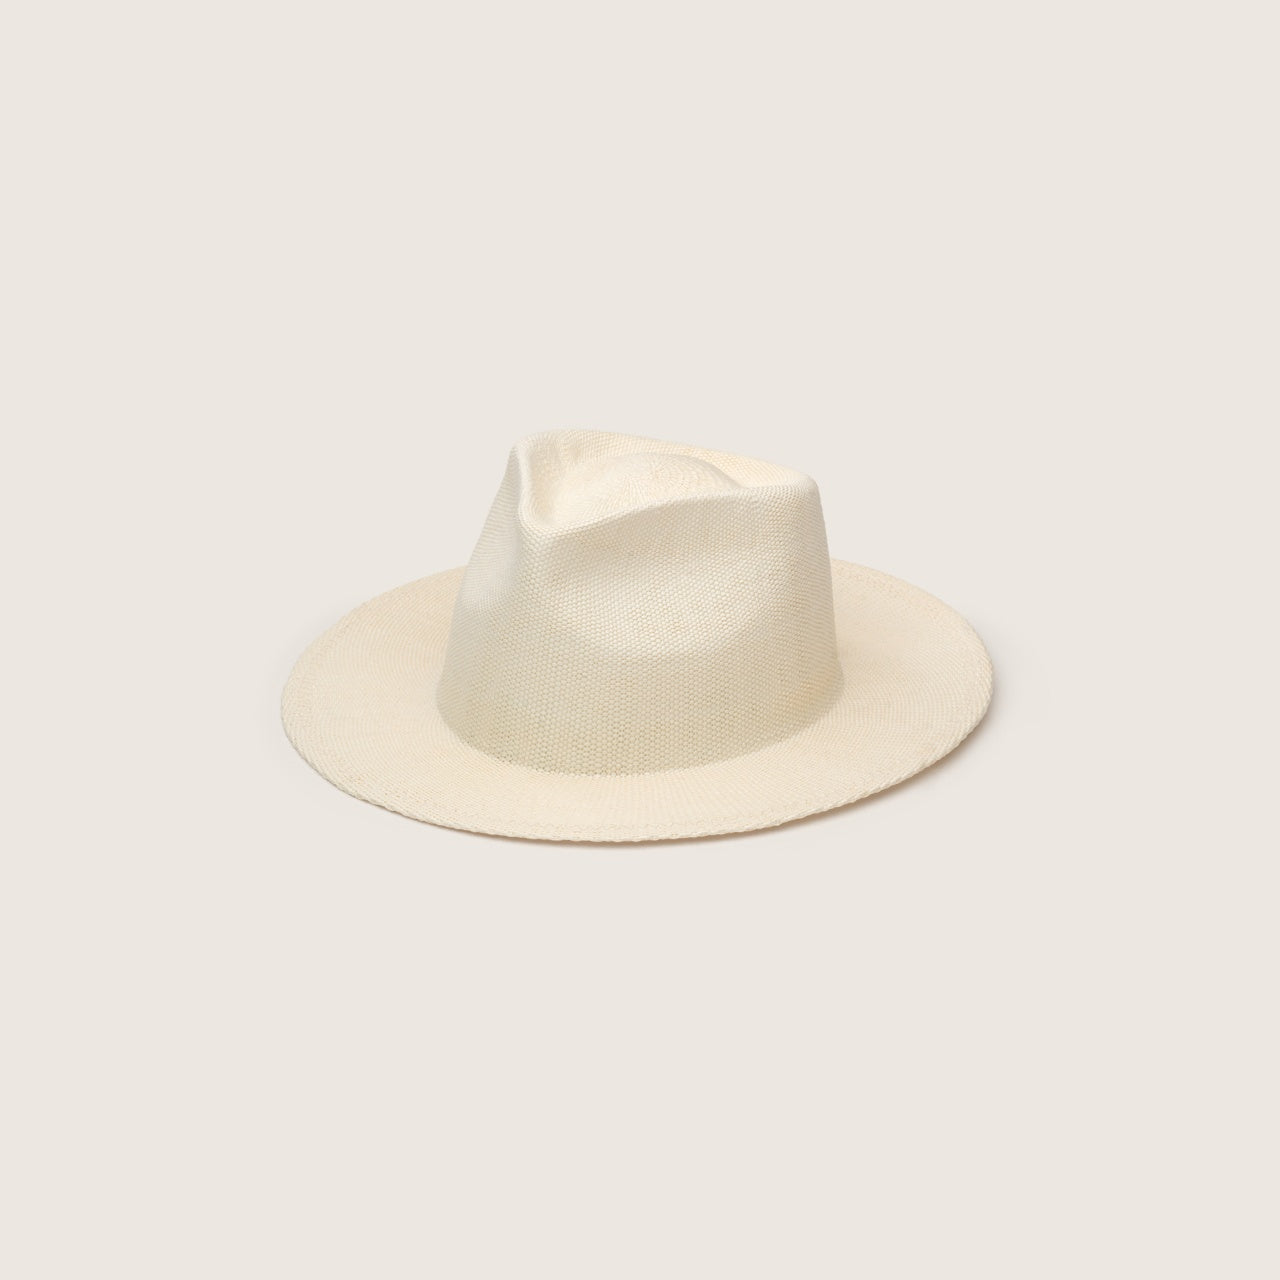 front view of a straw fedora hat